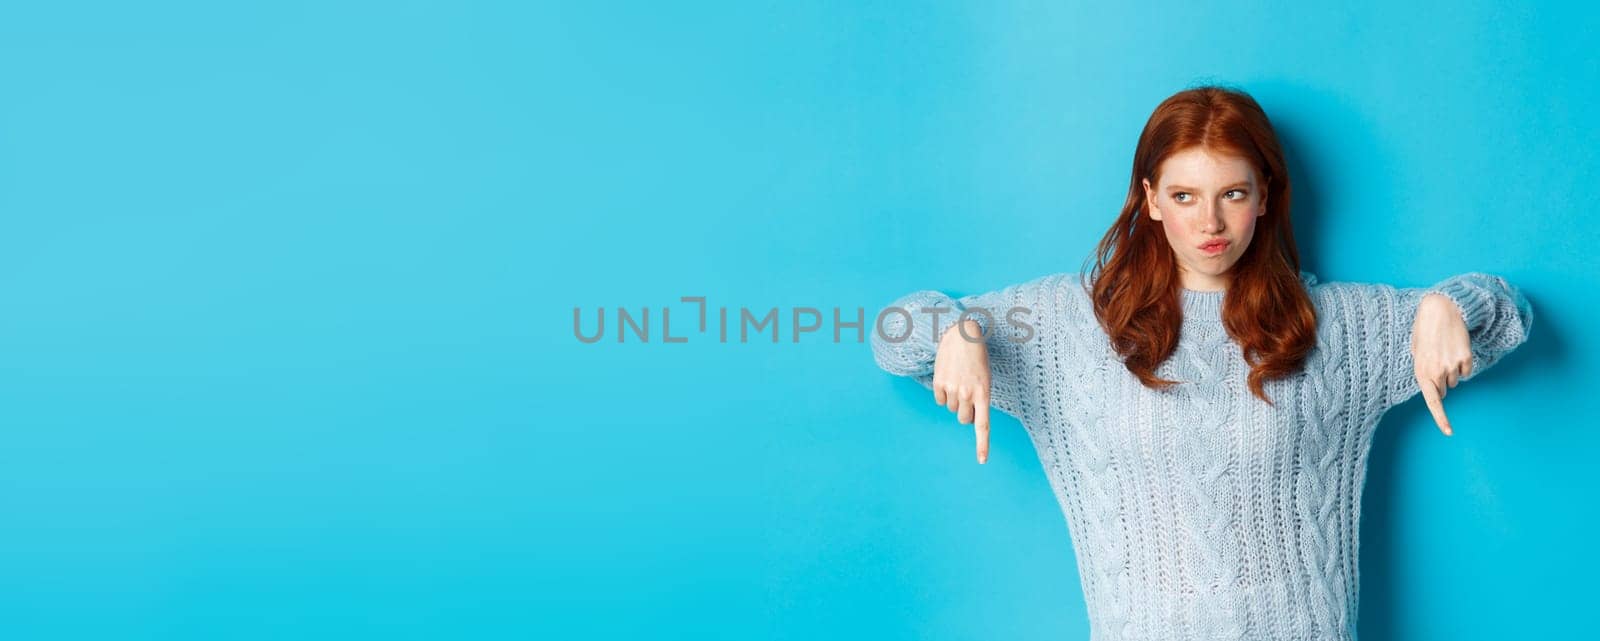 Winter holidays and people concept. Indecisive redhead girl in sweater pointing fingers down and thinking, having doubts, standing over blue background.